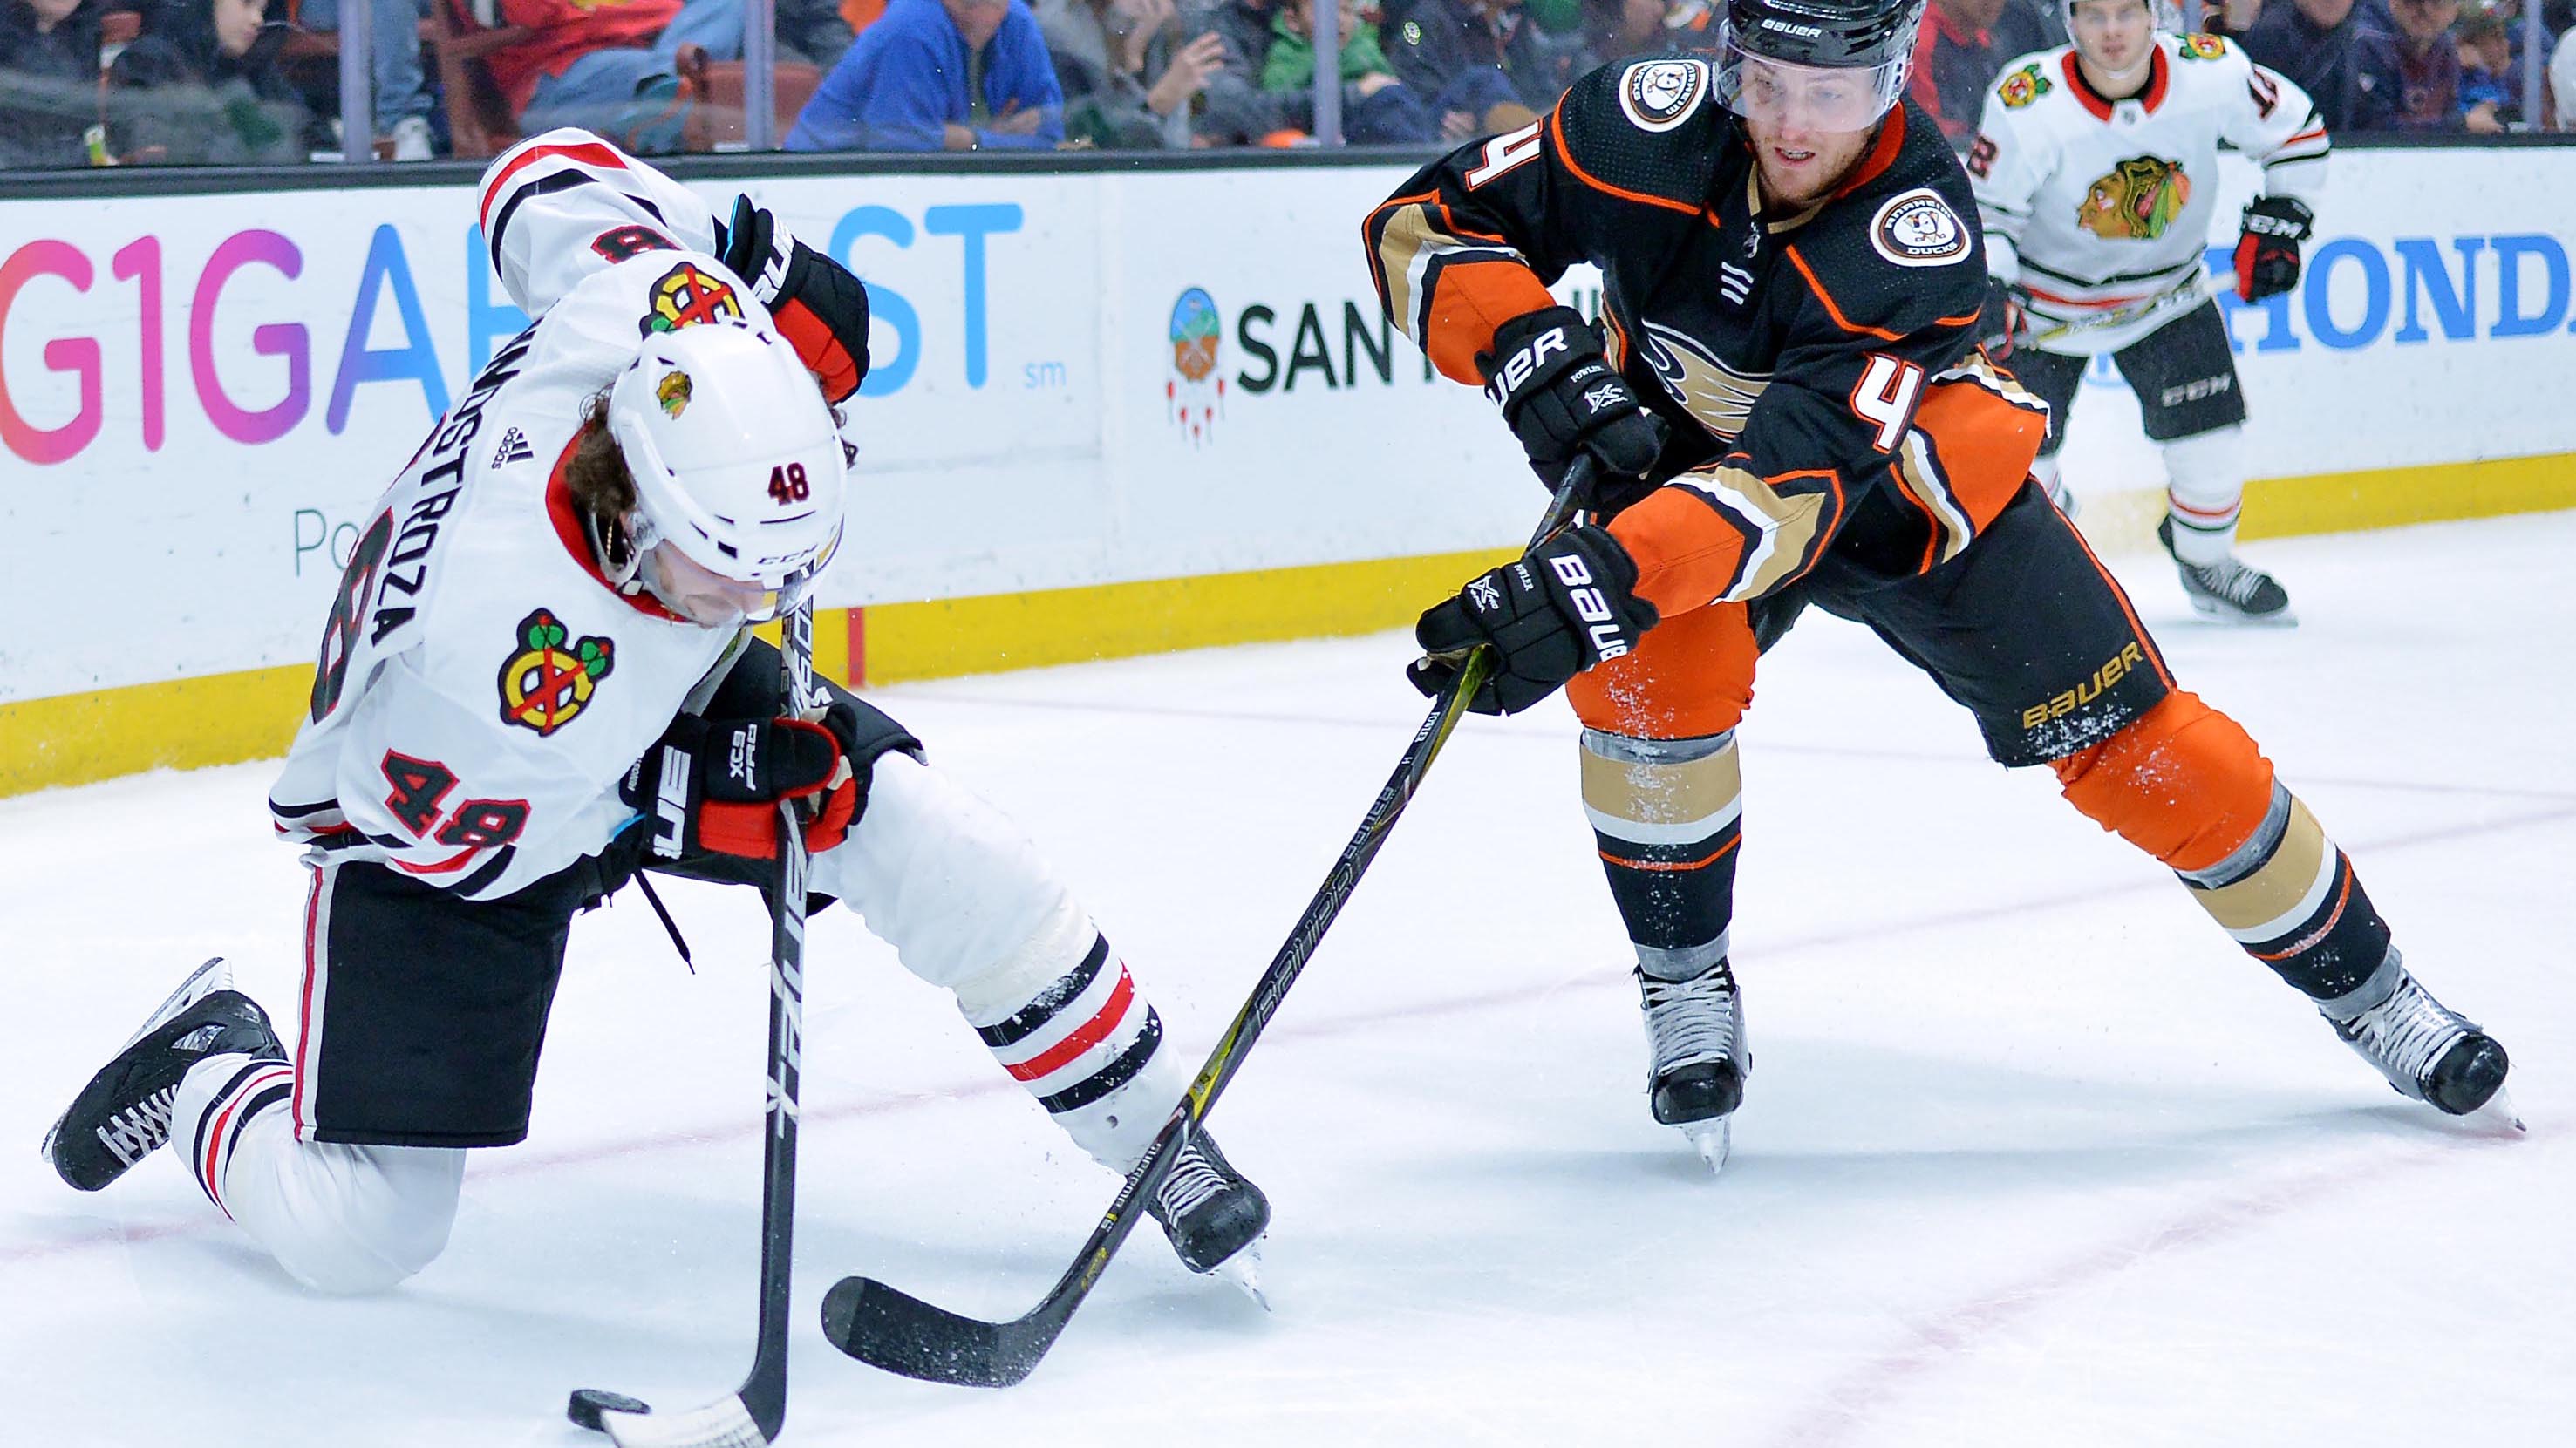 Ducks continue playoff push with dominant win over Blackhawks